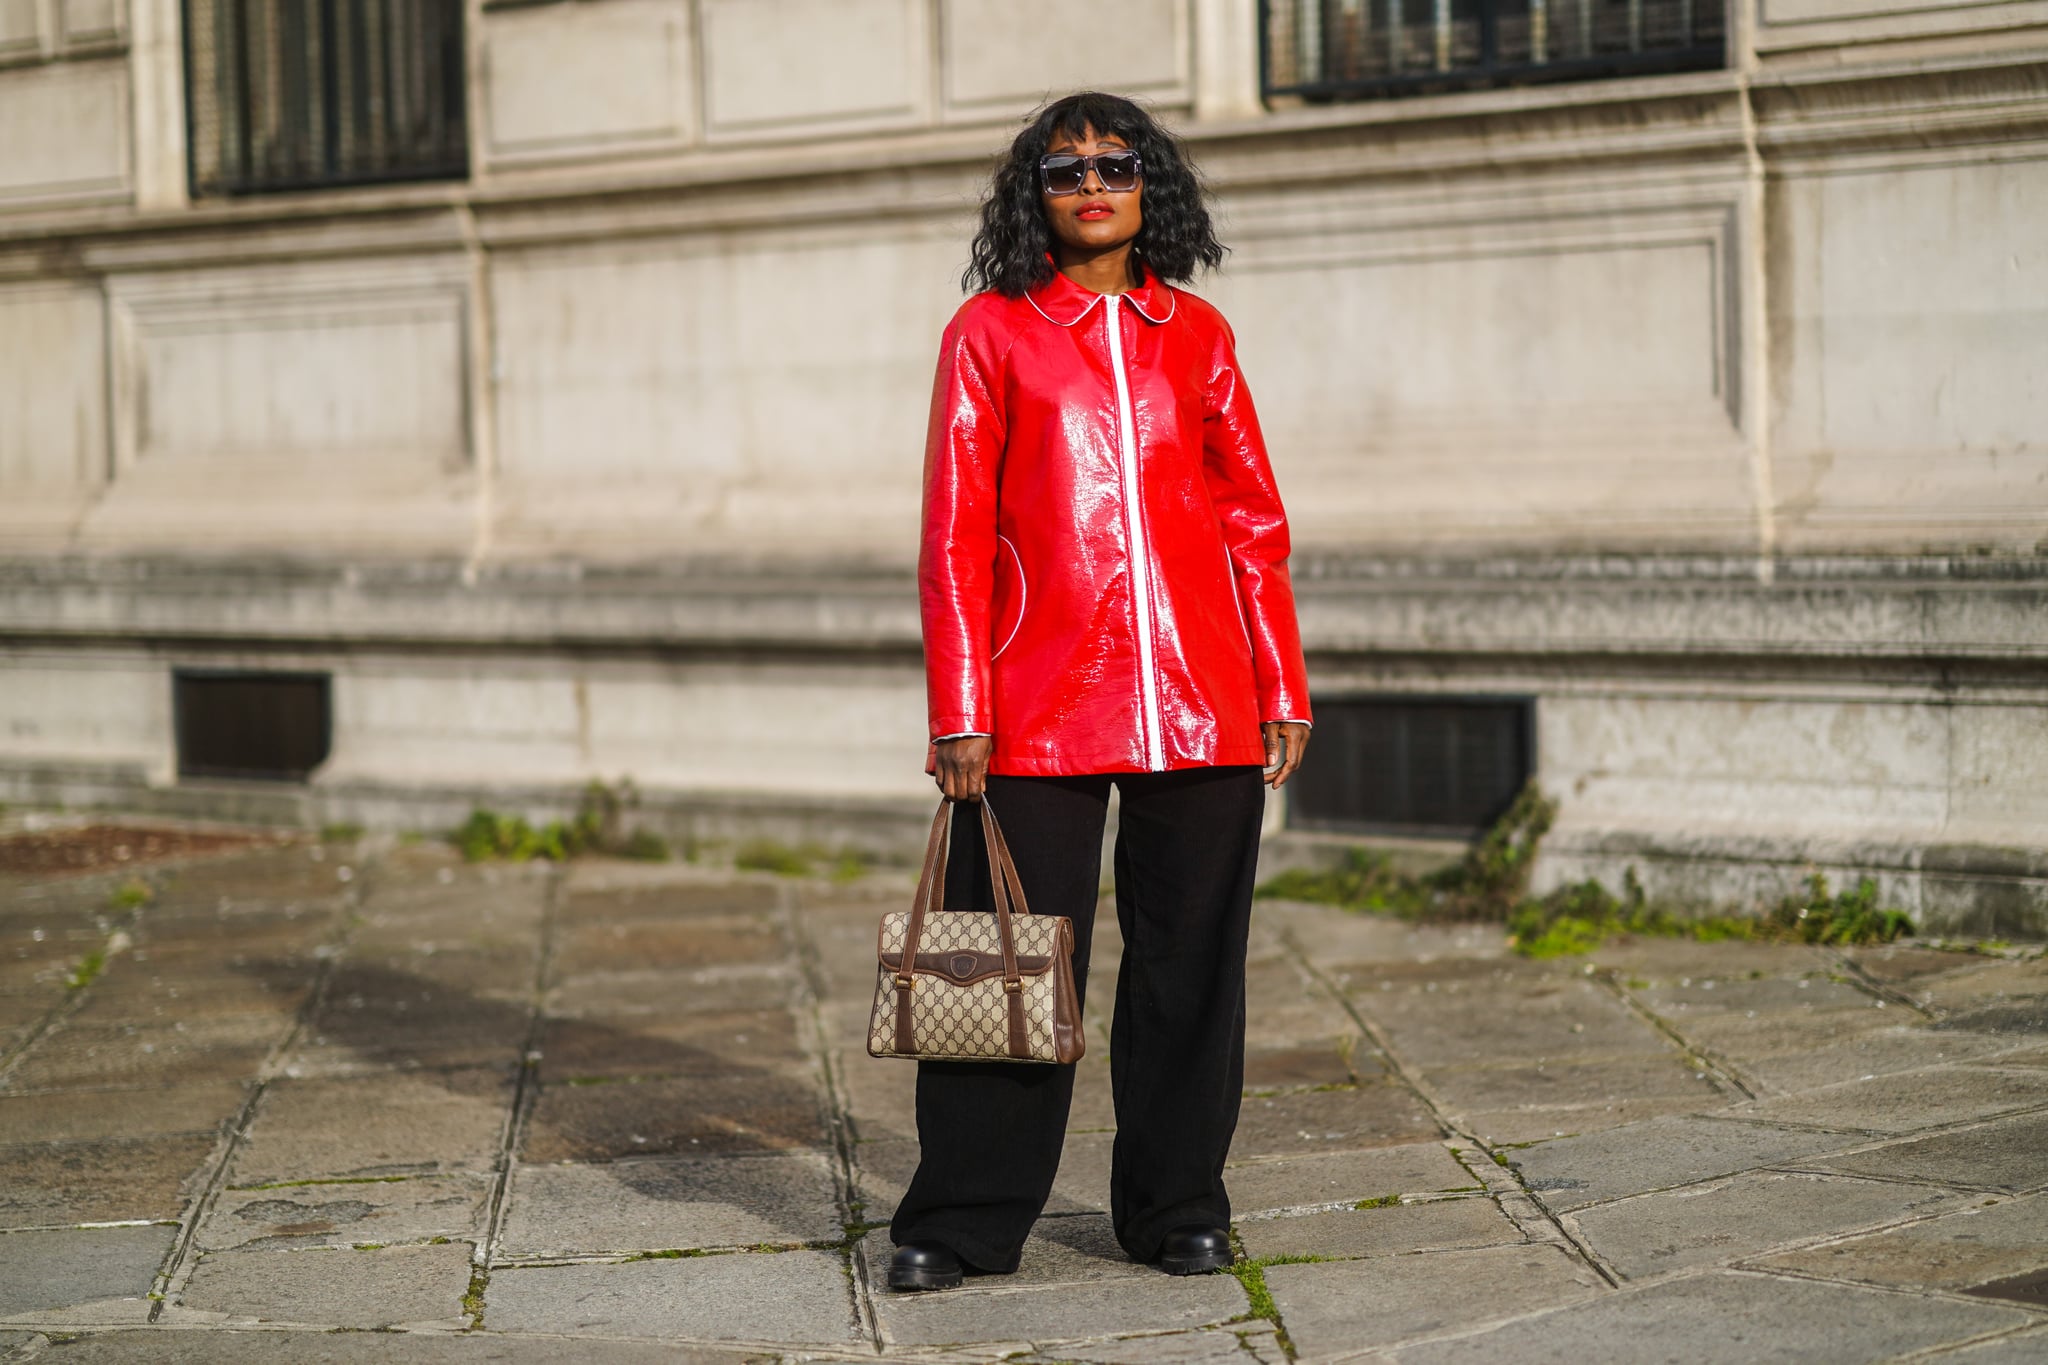 PARIS, FRANCE - FEBRUARY 20: Carrole Sagba aka Linaose wears sunglasses from Gigi Studio, a red shiny vinyl jacket, black flared pants from Bershka, black leather boots from Flattered, a brown Gucci monogram bag, on February 20, 2021 in Paris, France. (Photo by Edward Berthelot/Getty Images)